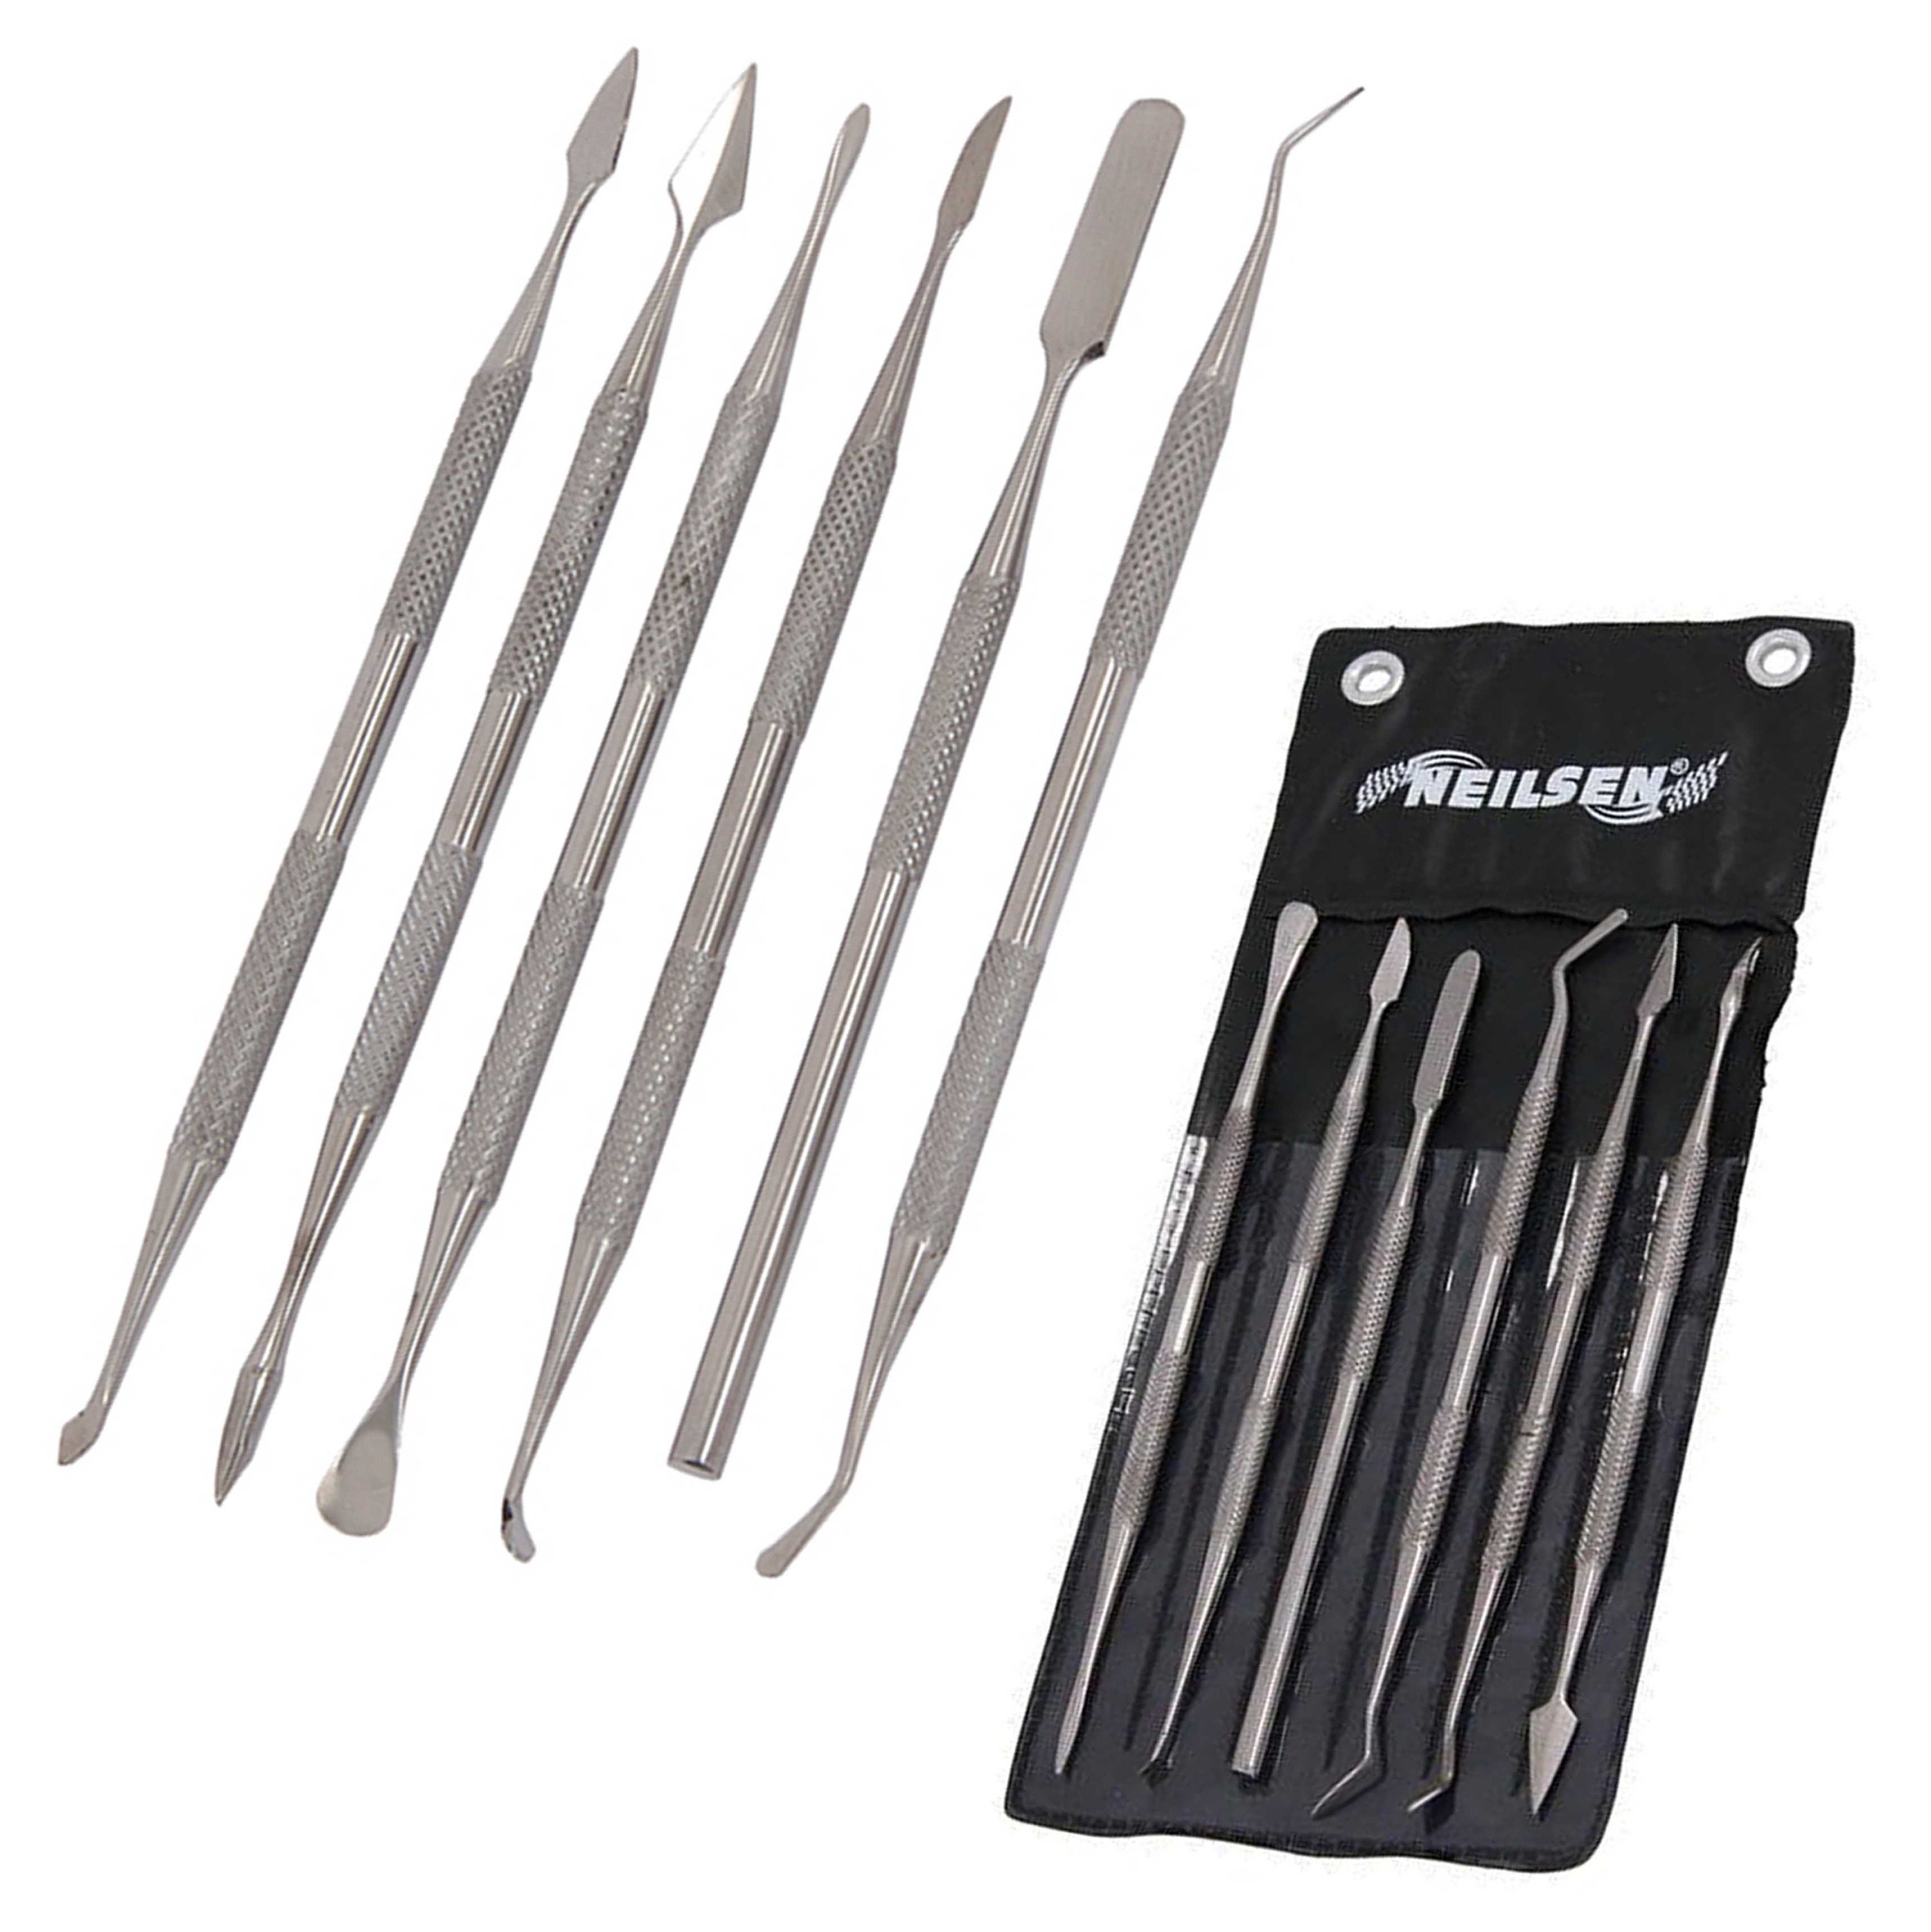 6pcs/set Pro Stainless Steel Wax Carving Pottery Clay Sculpting Tool Set MP 